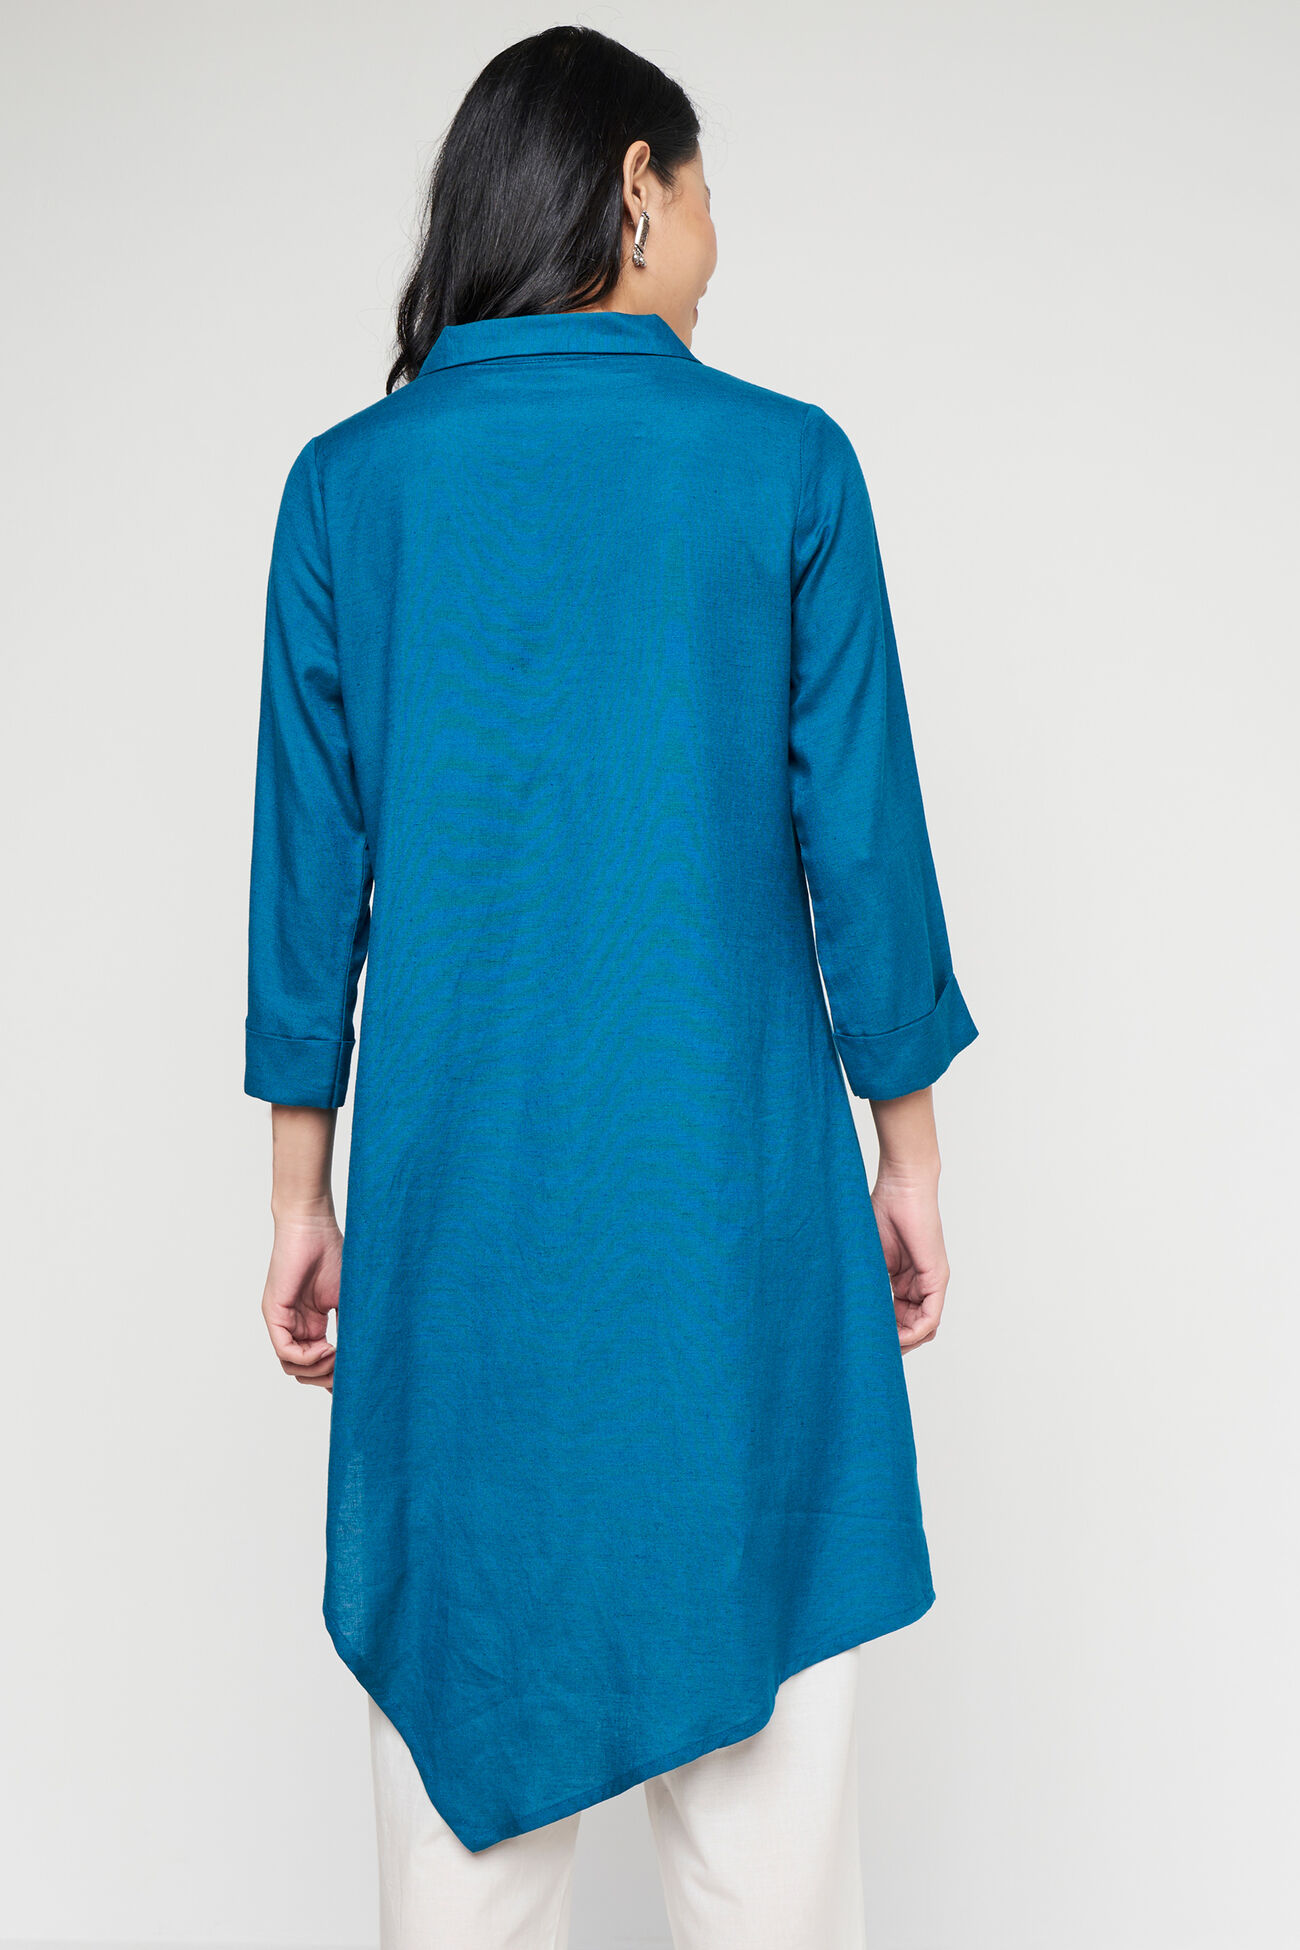 Solid Asymmetric Tunic, Teal, image 4